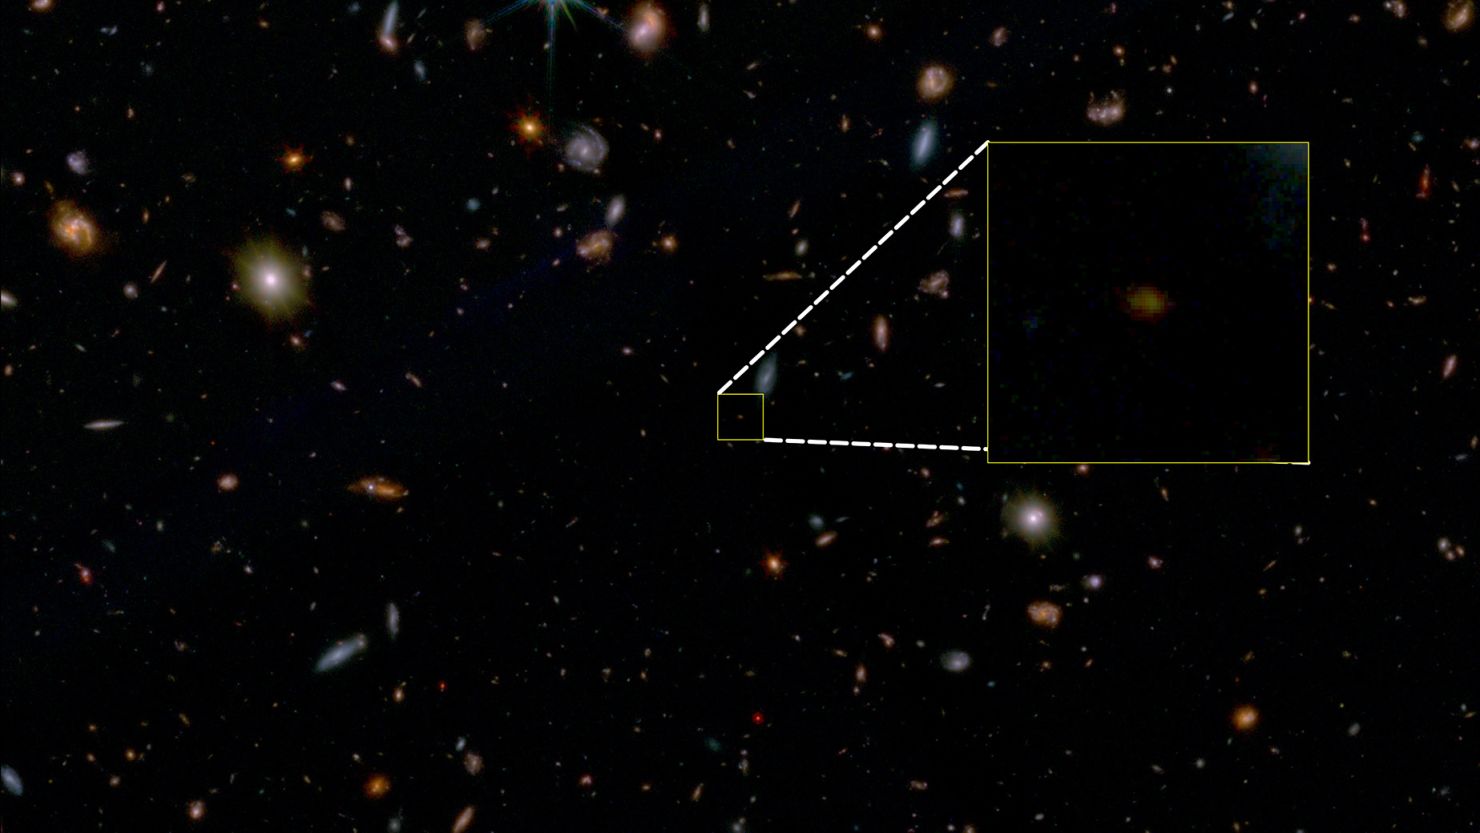 A new image taken by the James Webb Space Telescope reveals a "dead" galaxy, named JADES-GS-z7-01-QU, in the distant universe.